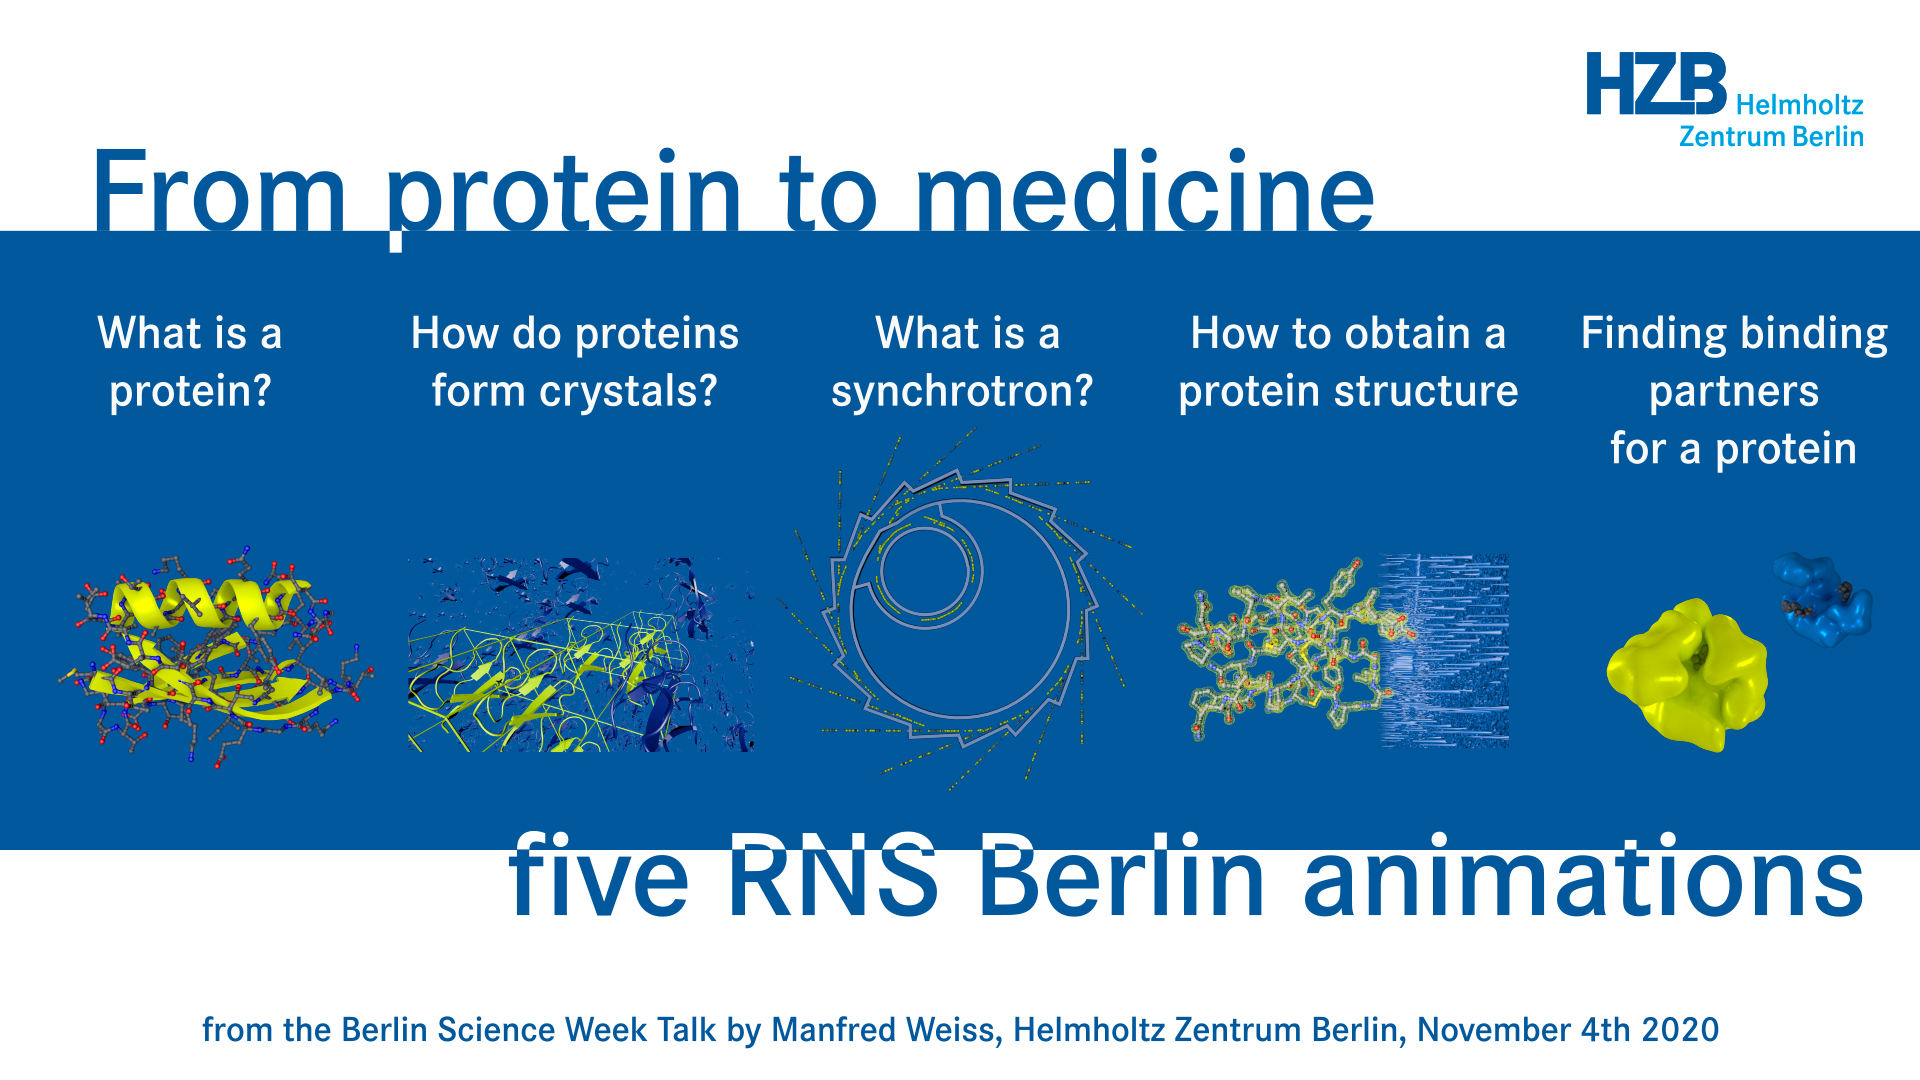 From protein to medicine